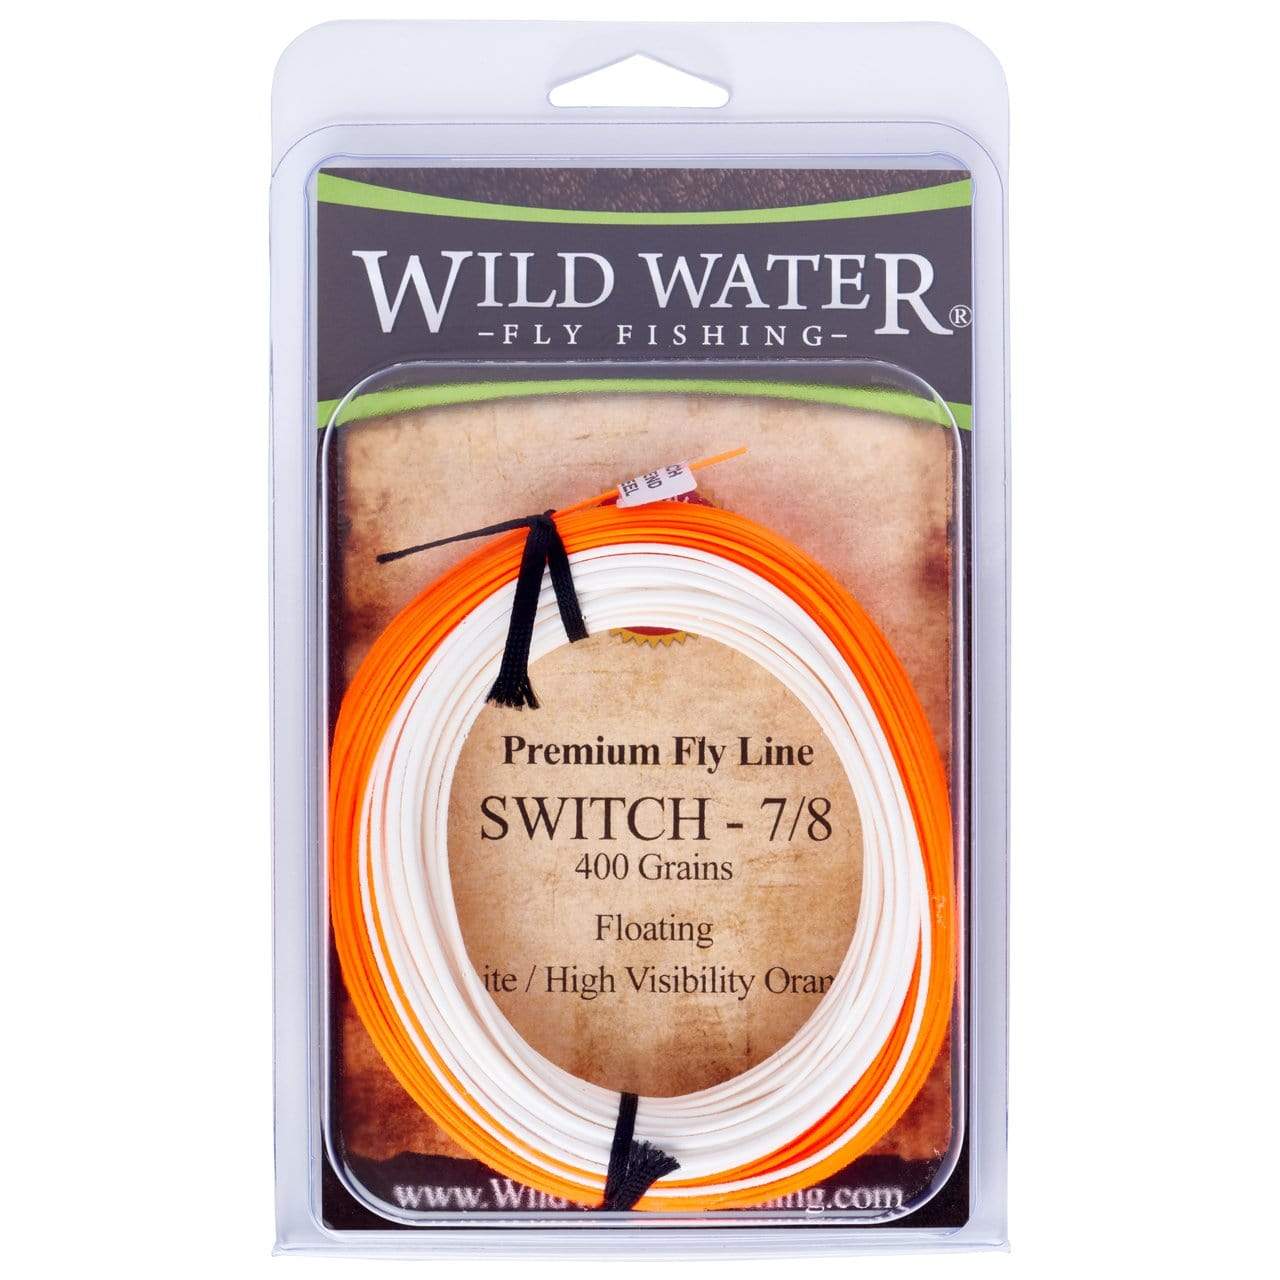 Wild Water Fly Fishing 7/8F Switch Line, 400 grains